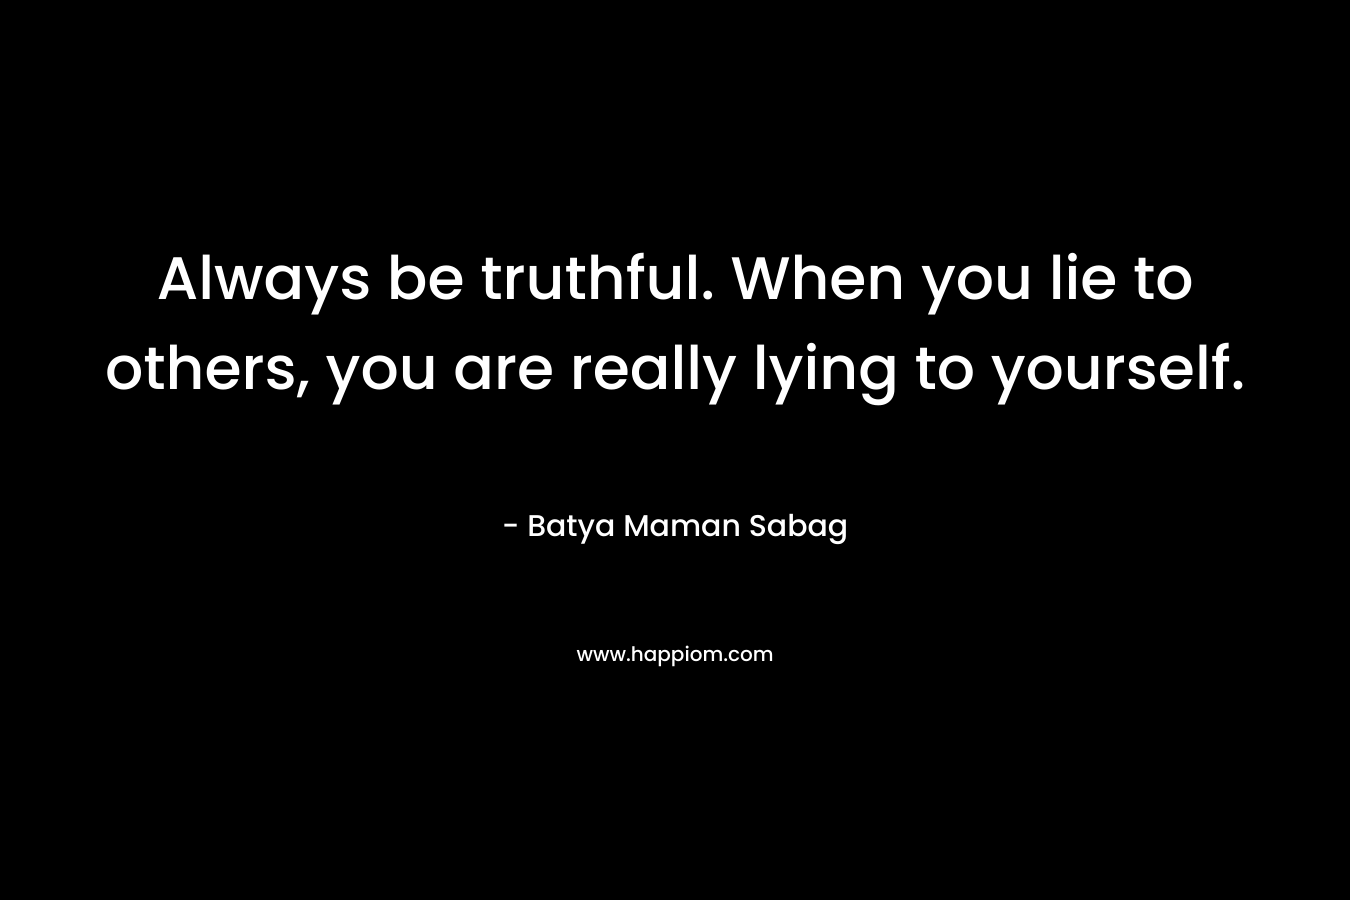 Always be truthful. When you lie to others, you are really lying to yourself.